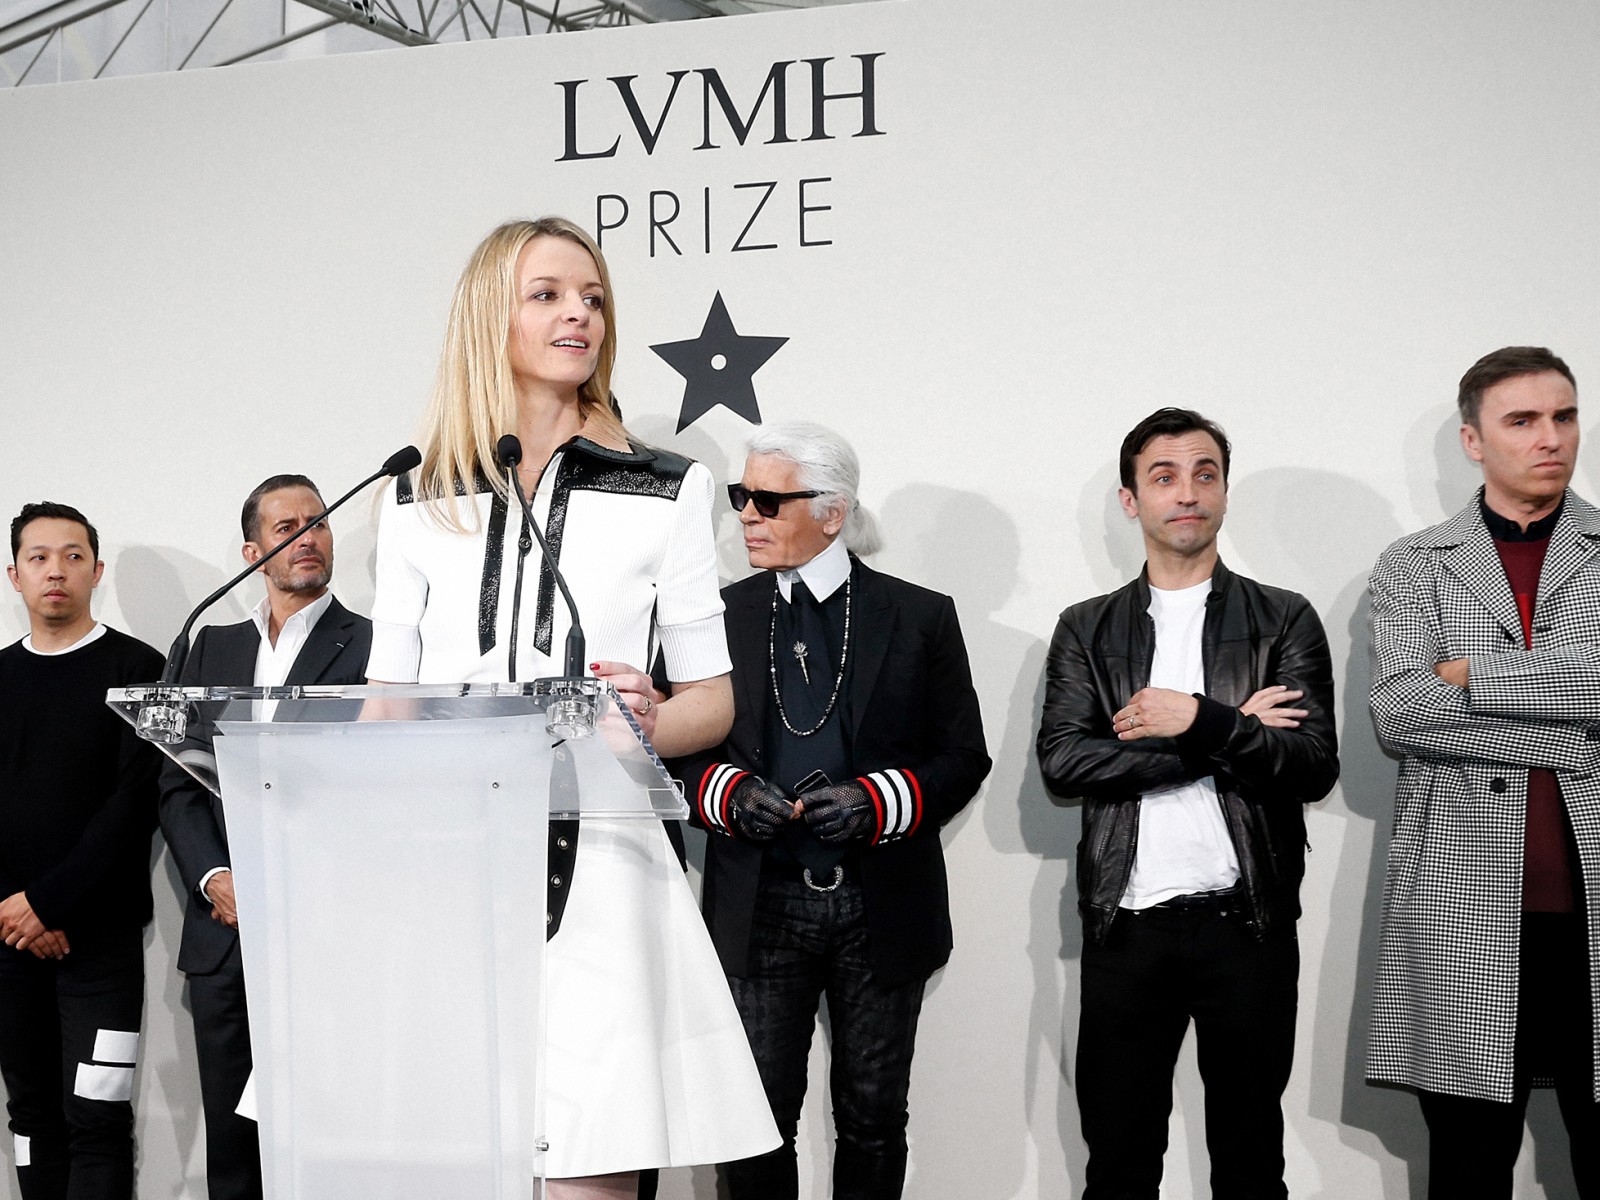 Delphine Arnault on what it takes to win the LVMH Prize